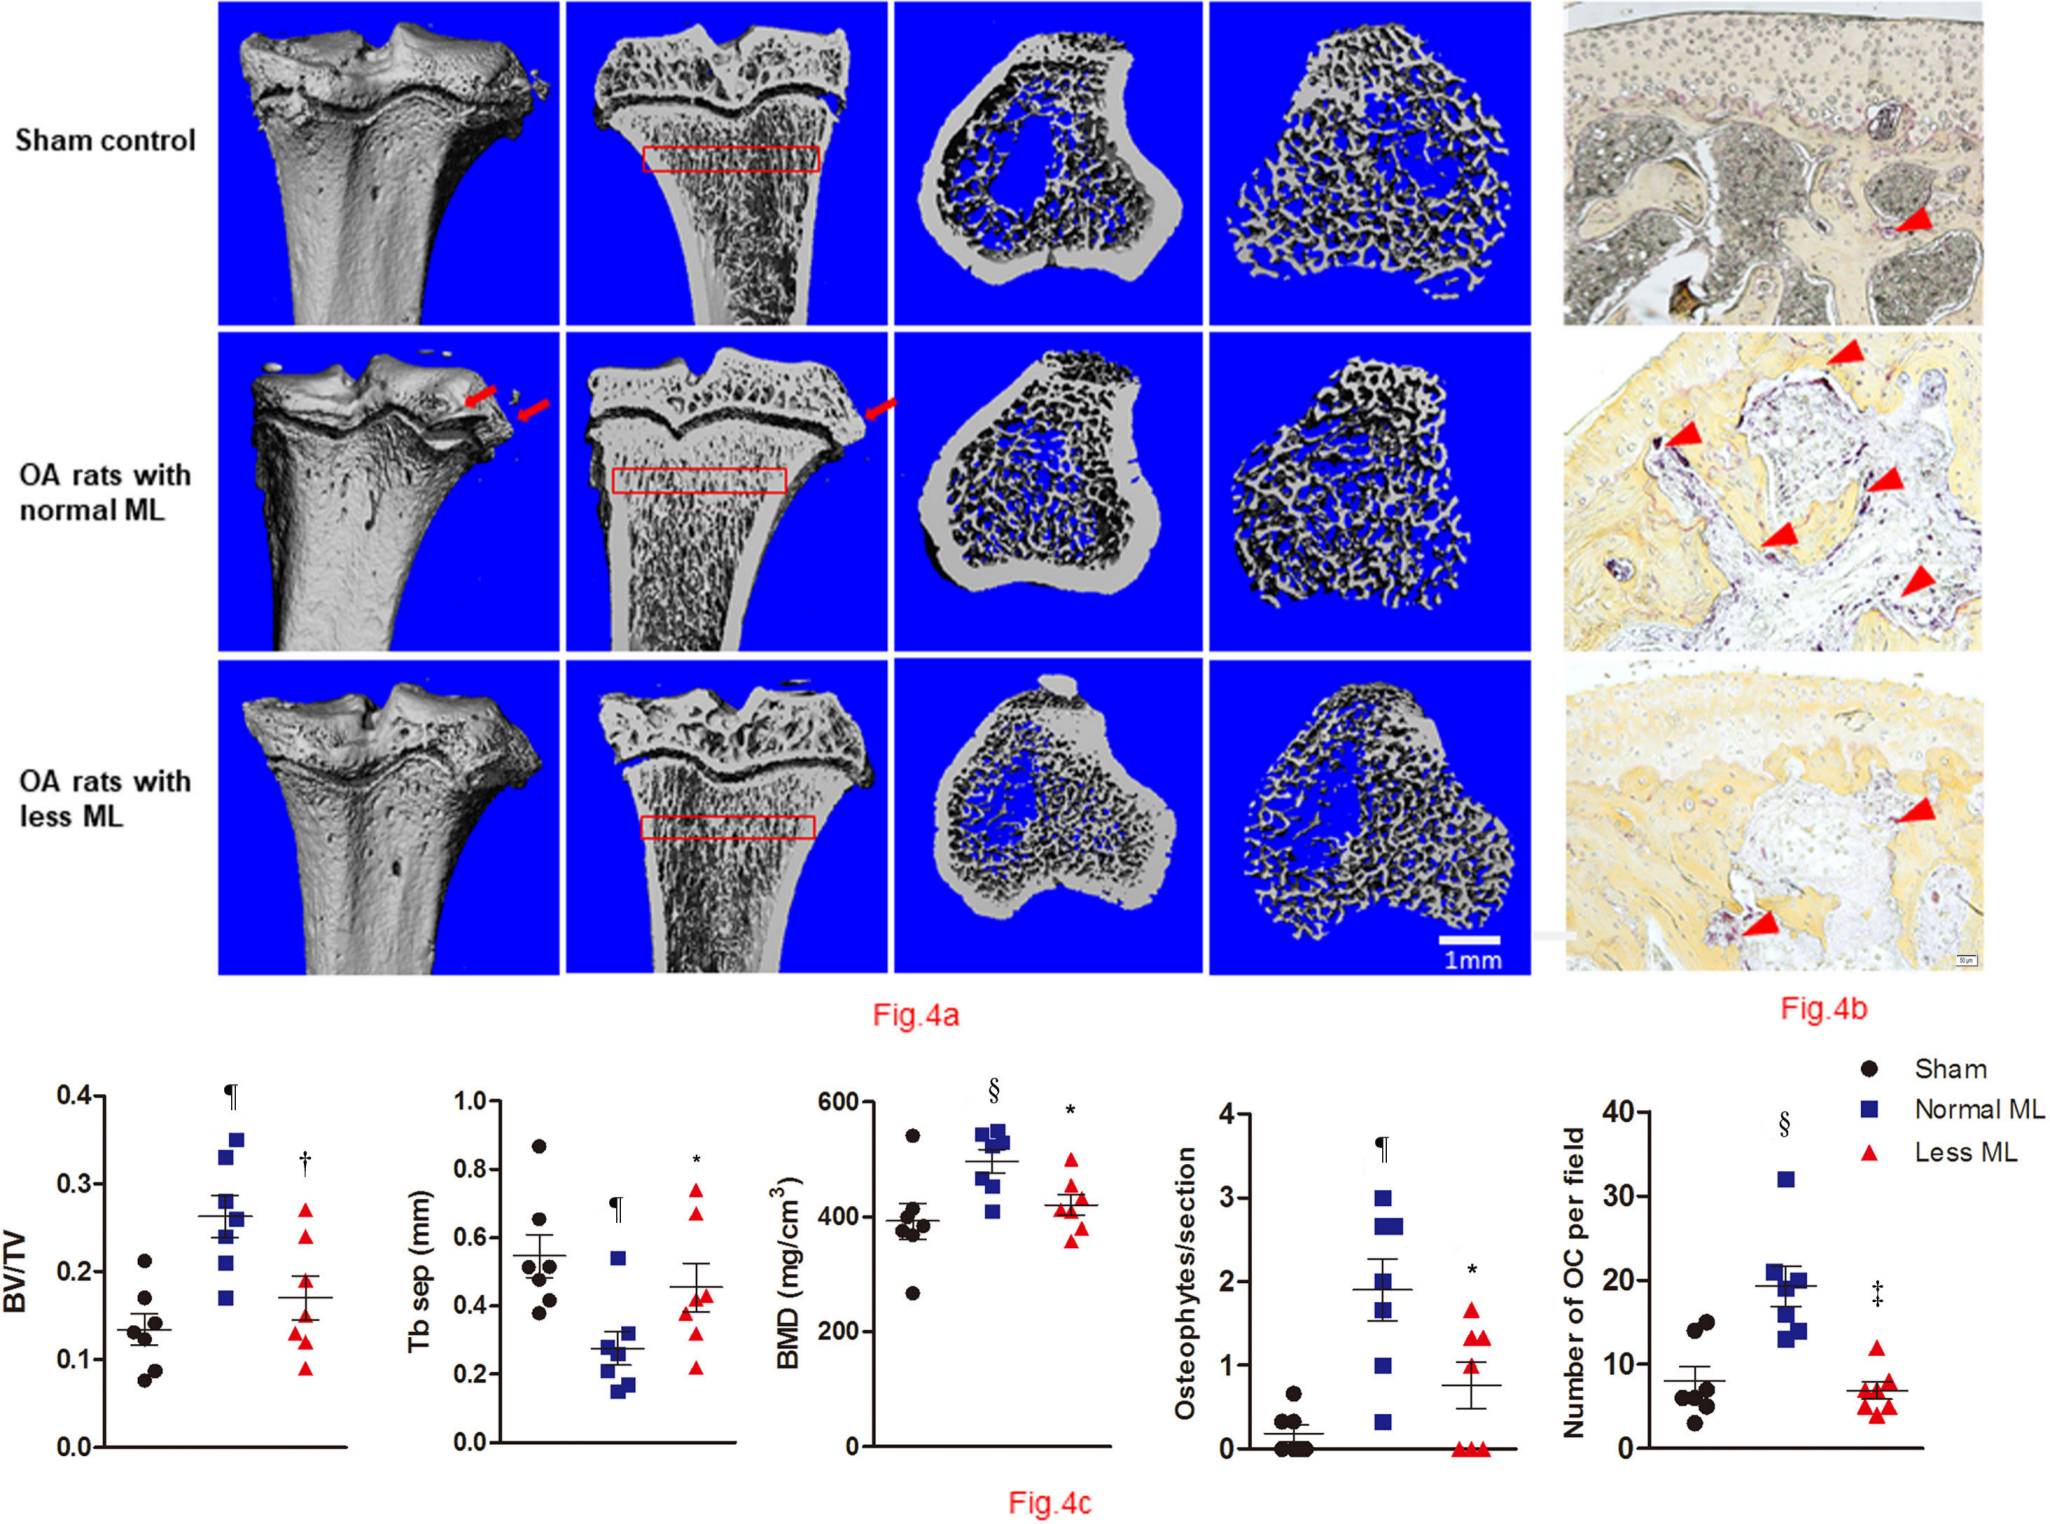 Fig. 4 
            Less mechanical loading (ML) reduced abnormal bone remodelling in subchondral bone in an osteoarthritis (OA) rat. a) Micro-CT of the tibia subchondral bone of rats showed that OA rats with less ML displayed decreased bone mineral density (BMD) and increased trabecular separation (TbSp), compared with OA rats with normal ML. b) The osteophytes were counted in three sections of each rat, and findings revealed that the mean number of osteophytes per joint in the less ML group was significantly lower than that of the normal ML group (red arrows). In addition, OA rats with less ML also showed a significantly lower number of osteoclasts (OCs) per bone volume, compared with the normal ML group (red arrowheads). c) Furthermore, quantitative analysis showed that OA rats with less ML had significantly lower bone volume/tissue volume (BV/TV) and BMD, and greater TbSep, which was seen in the subchondral bone 200 μm to 400 μm below the growth plate (red boxes in a). Scale bar: 1 mm. Values are presented as mean and standard error of the mean (SEM). One-way analysis of variance (ANOVA) was used, *p < 0.05; †p < 0.01; ‡p < 0.001, between OA rats with normal and less ML. §p < 0.01; ¶p < 0.001, between sham controls and OA rats with normal ML. Magnification of Fig. 4b: 200×.
          